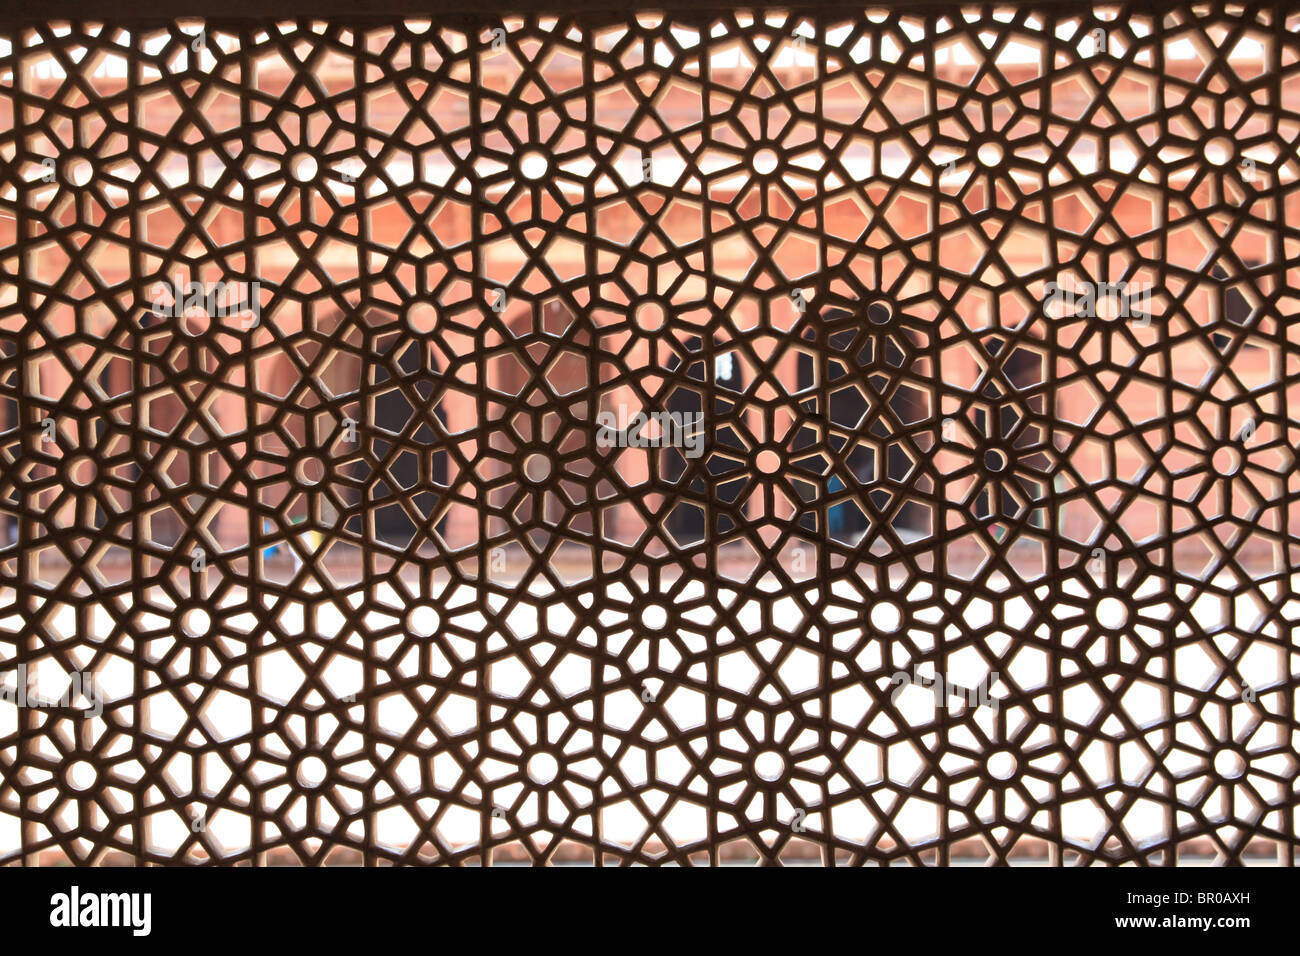 Finely carved white marble screen window of original Sufi shrine at Fatepuhr Sikri near Agra, India. Stock Photo